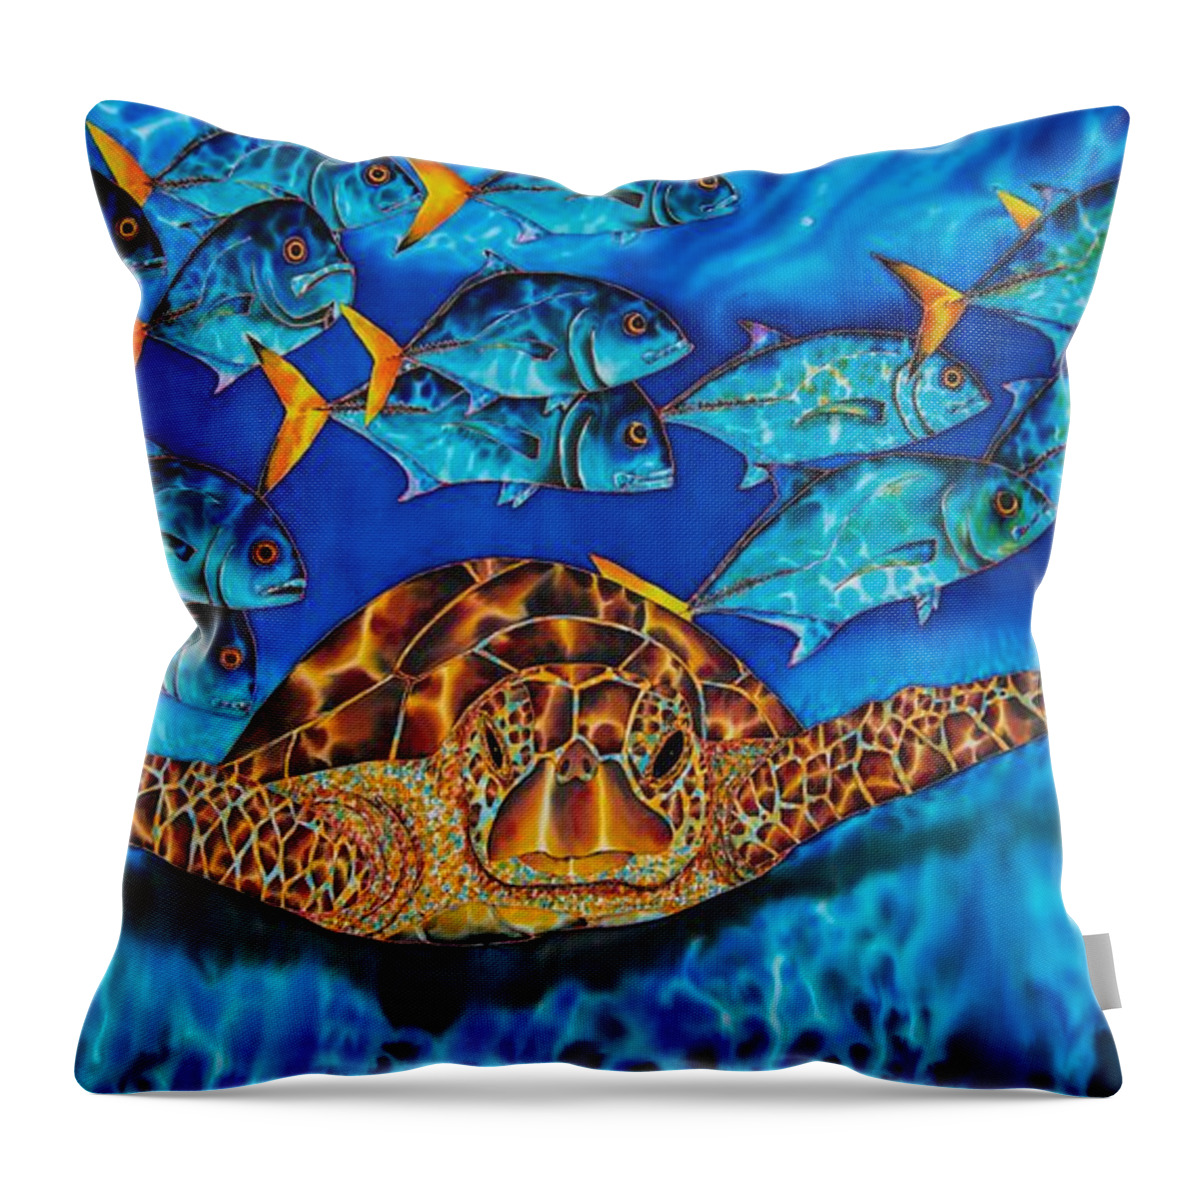 Turtle Throw Pillow featuring the painting Green Sea Turtle by Daniel Jean-Baptiste